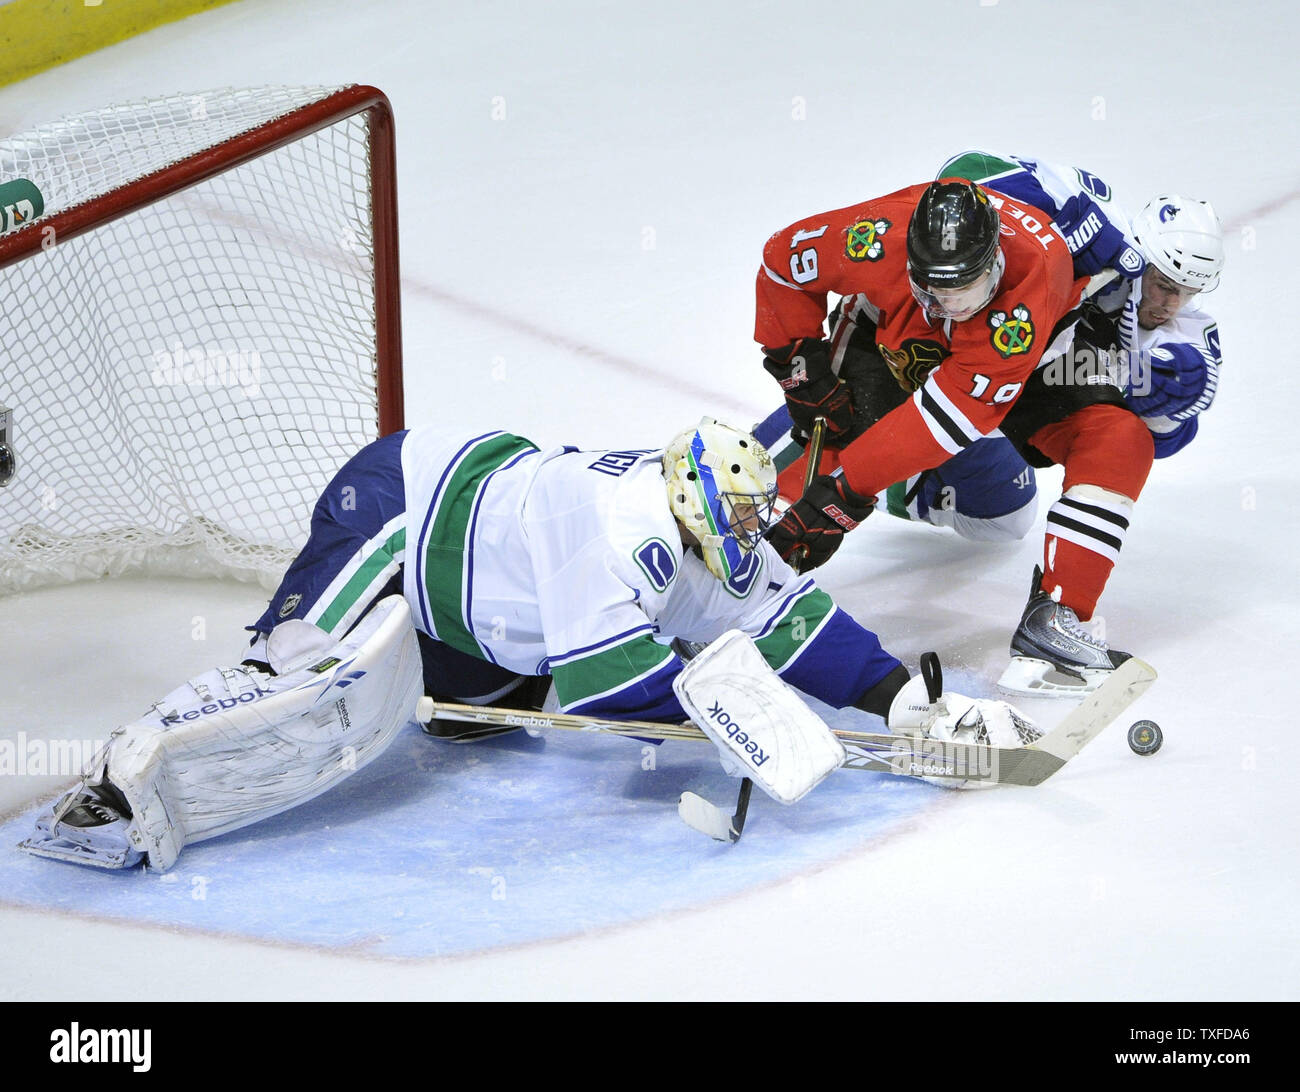 Alex burrows hi-res stock photography and images - Alamy